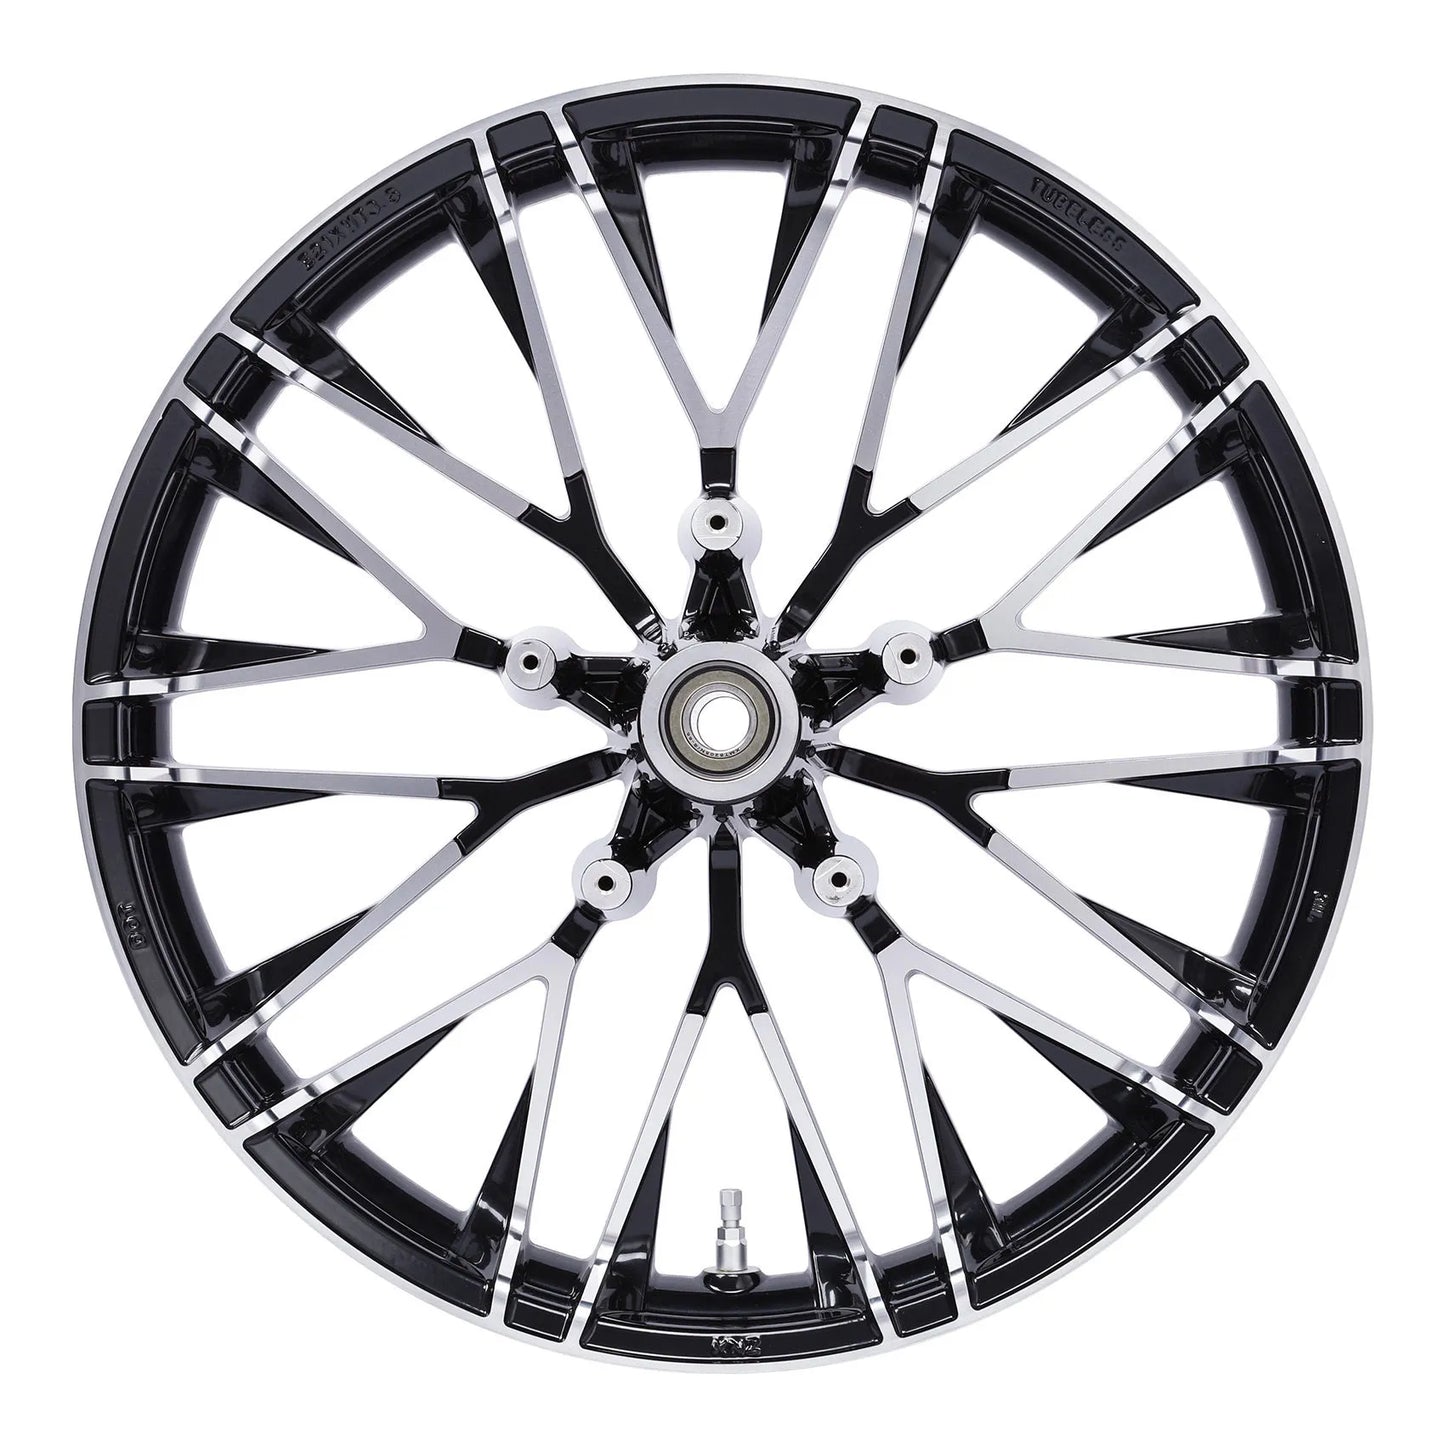 Voodoo Cycle House Custom 21" x 3.5" Front Wheel For Harley-Davidson & Custom Applications Touring Street Glide 2008-UP